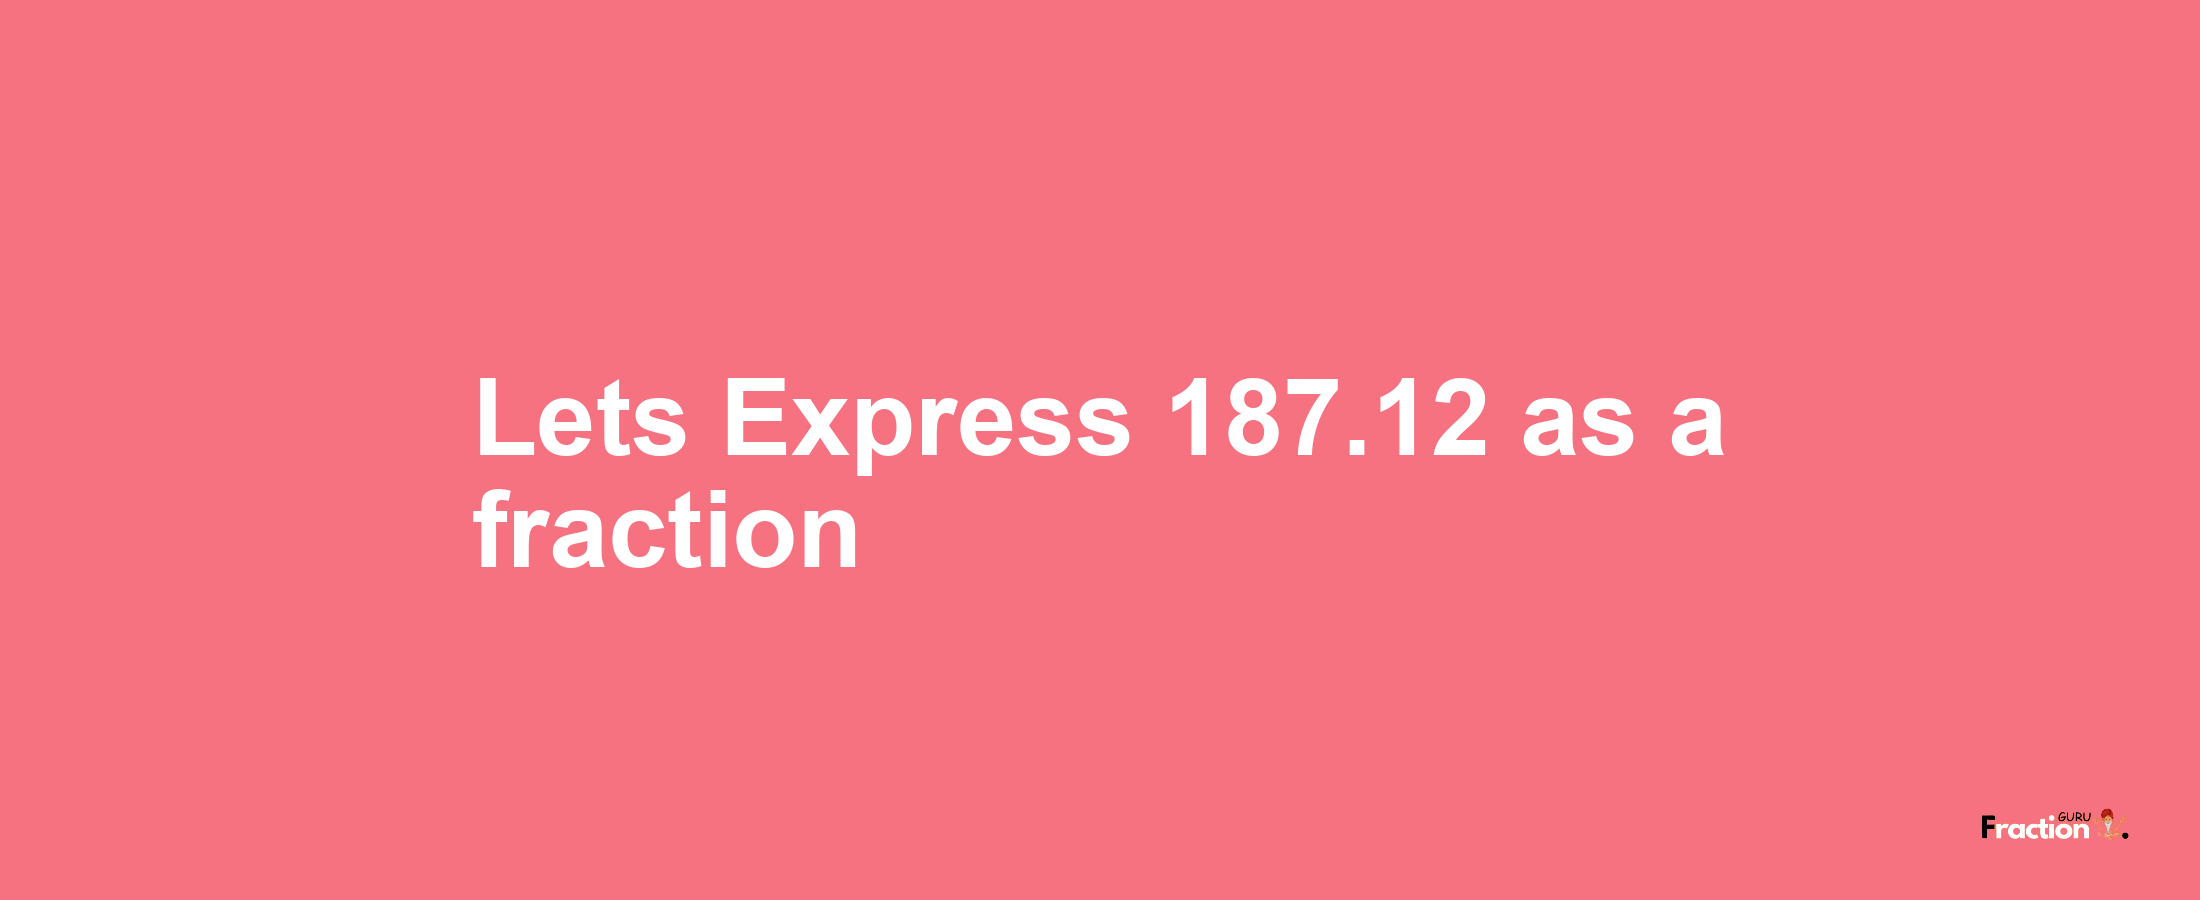 Lets Express 187.12 as afraction